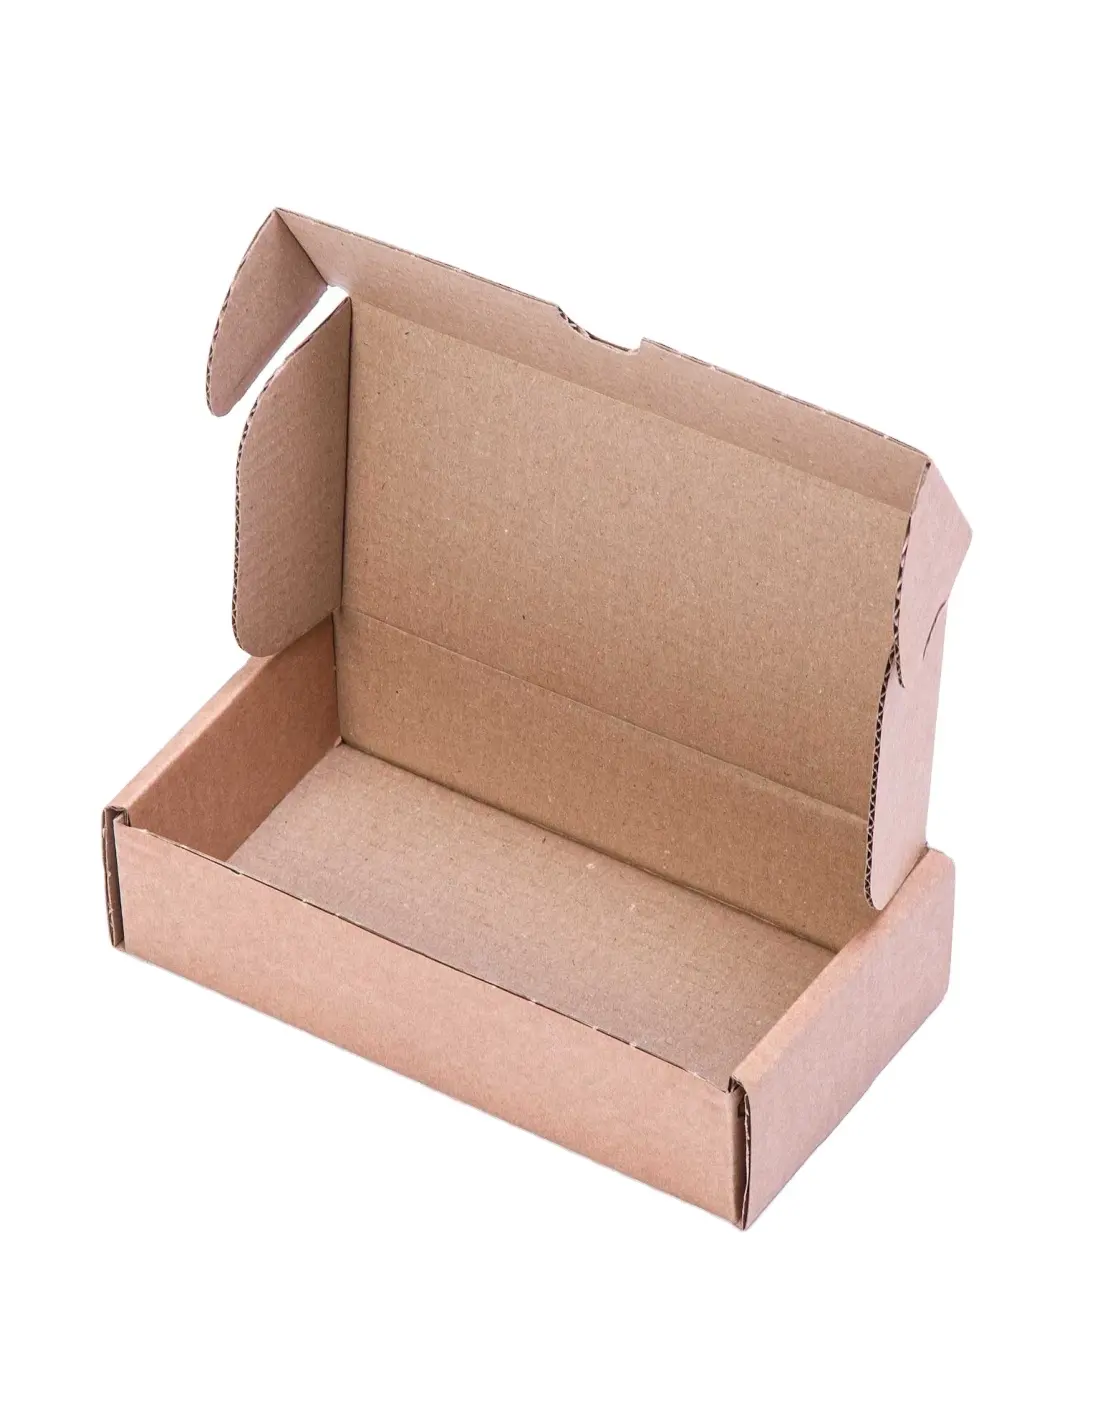 High Quality 18x10x5 cms Strong Self assembly Cardboard Boxes for protection on shipments and postal sendings